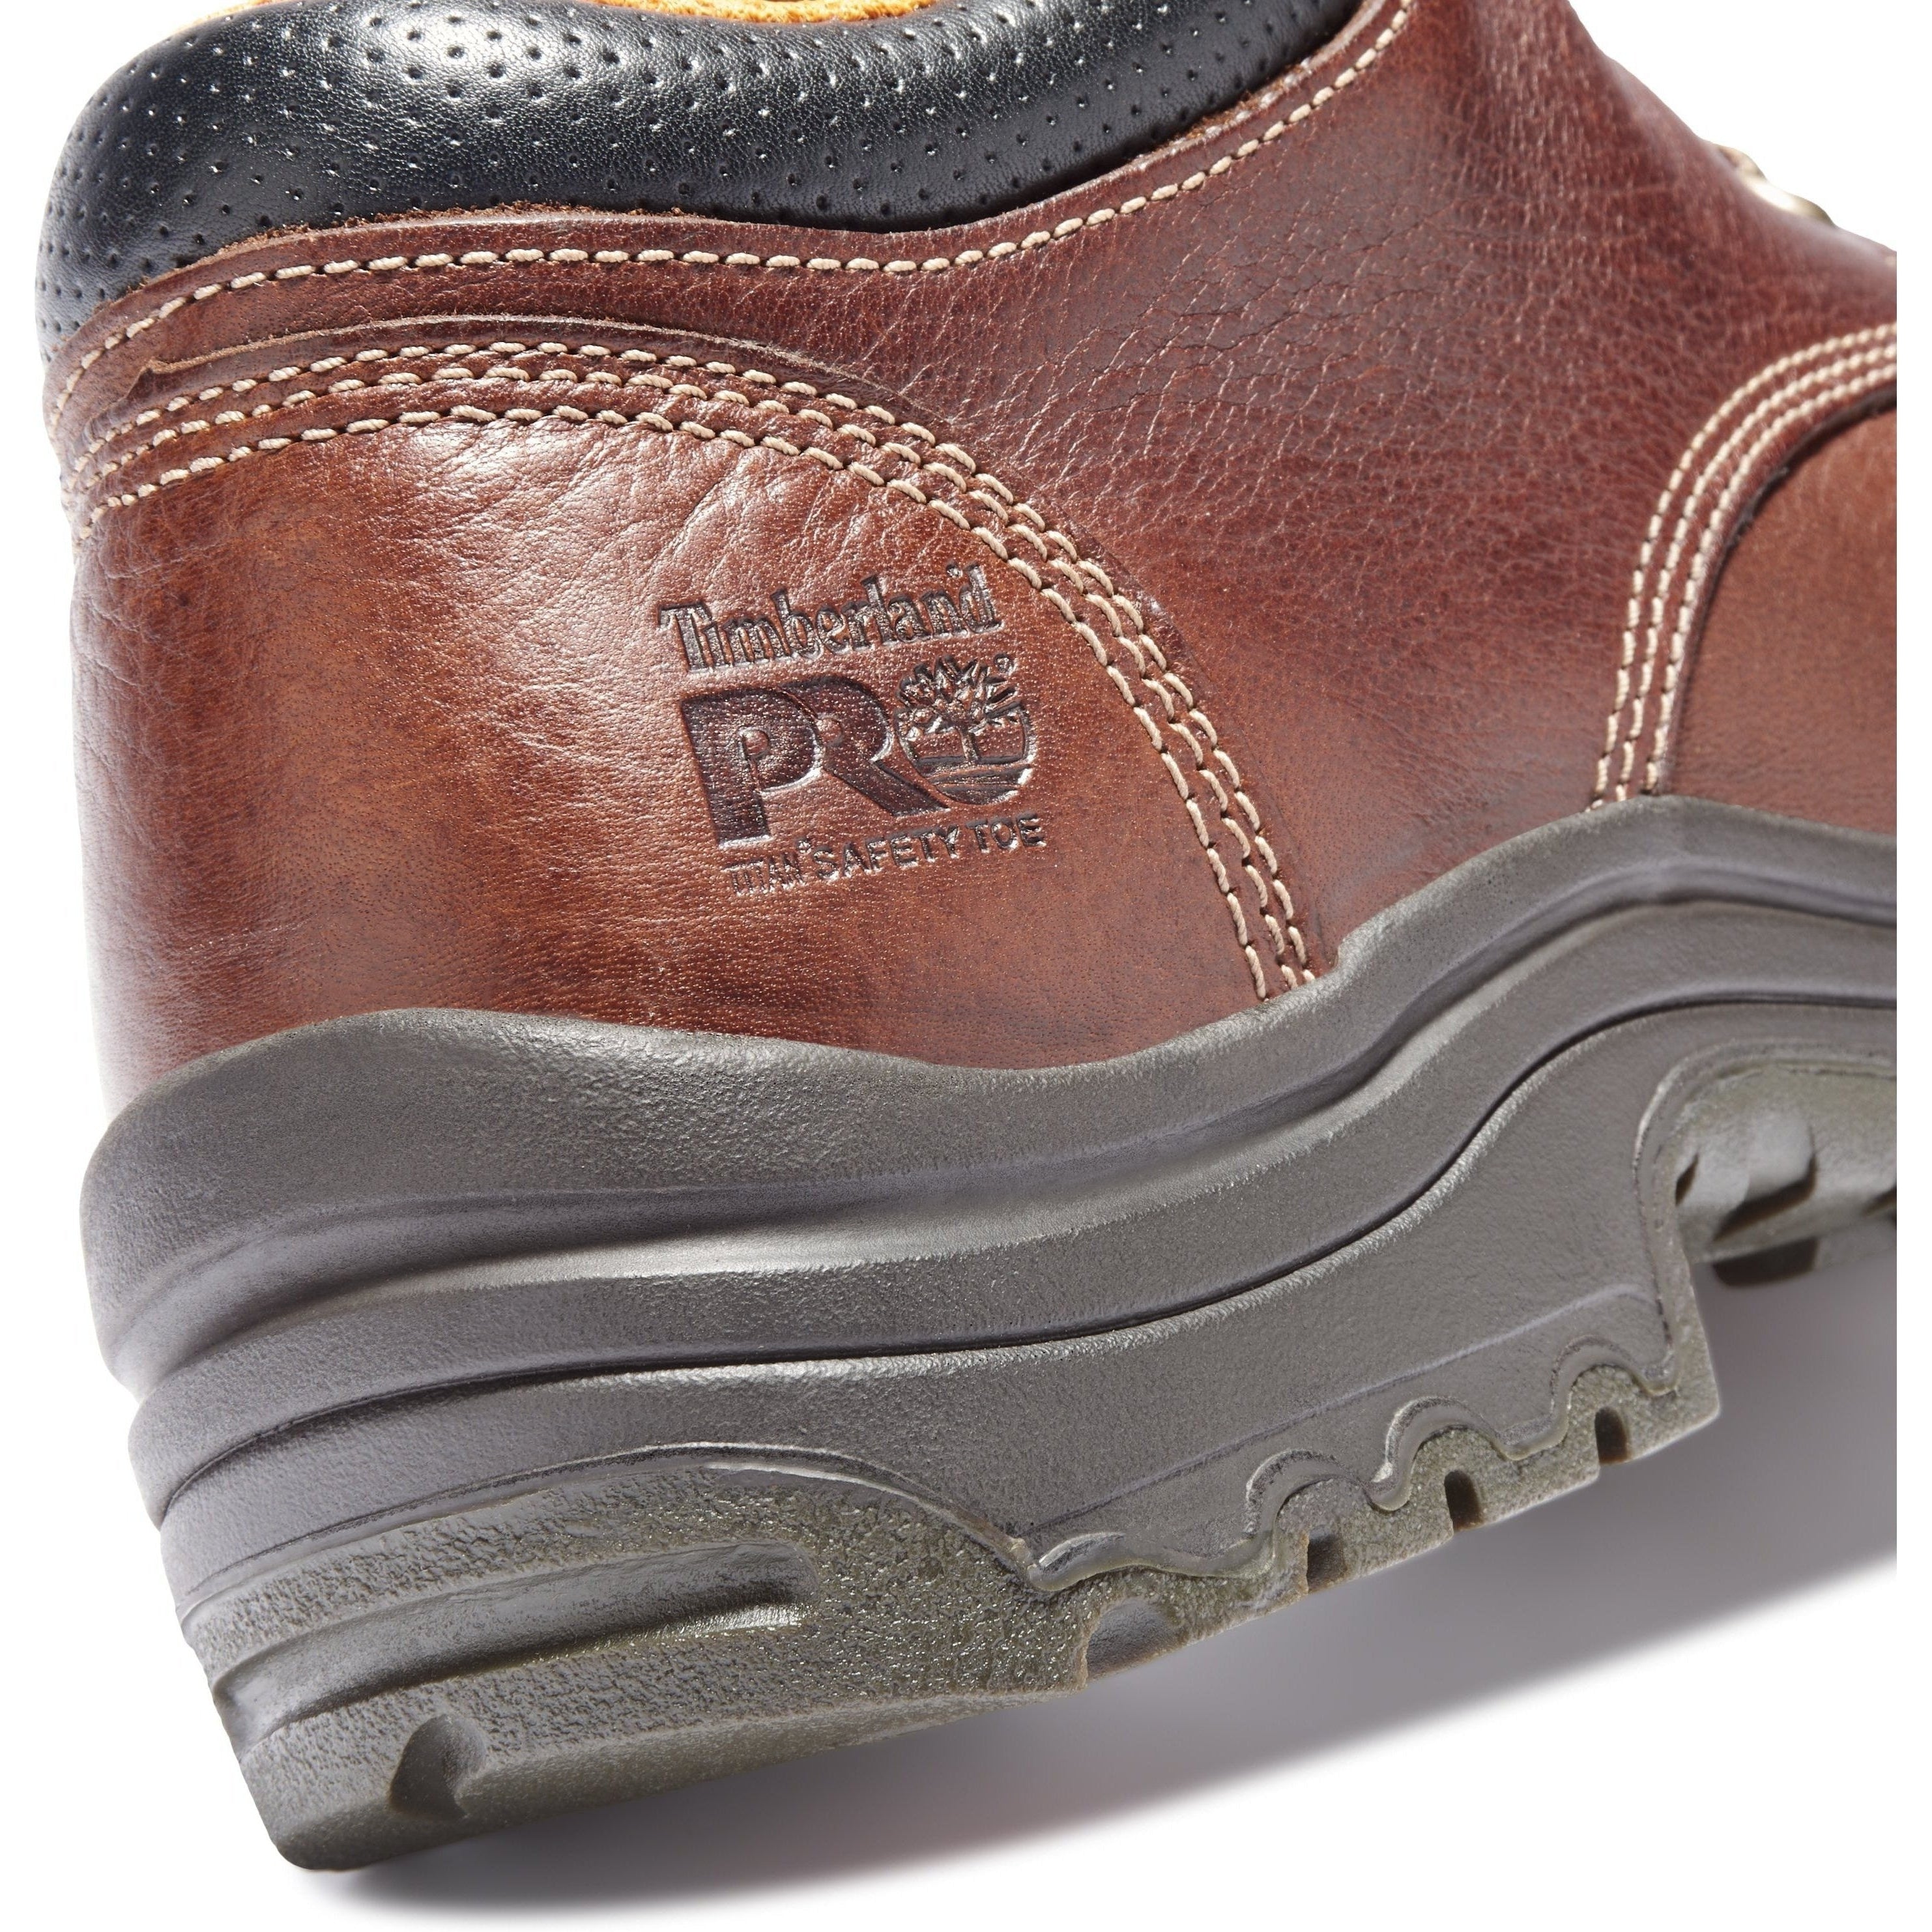 Timberland PRO Men's TiTAN Oxford Alloy Toe Work Shoe Brown TB047028210  - Overlook Boots